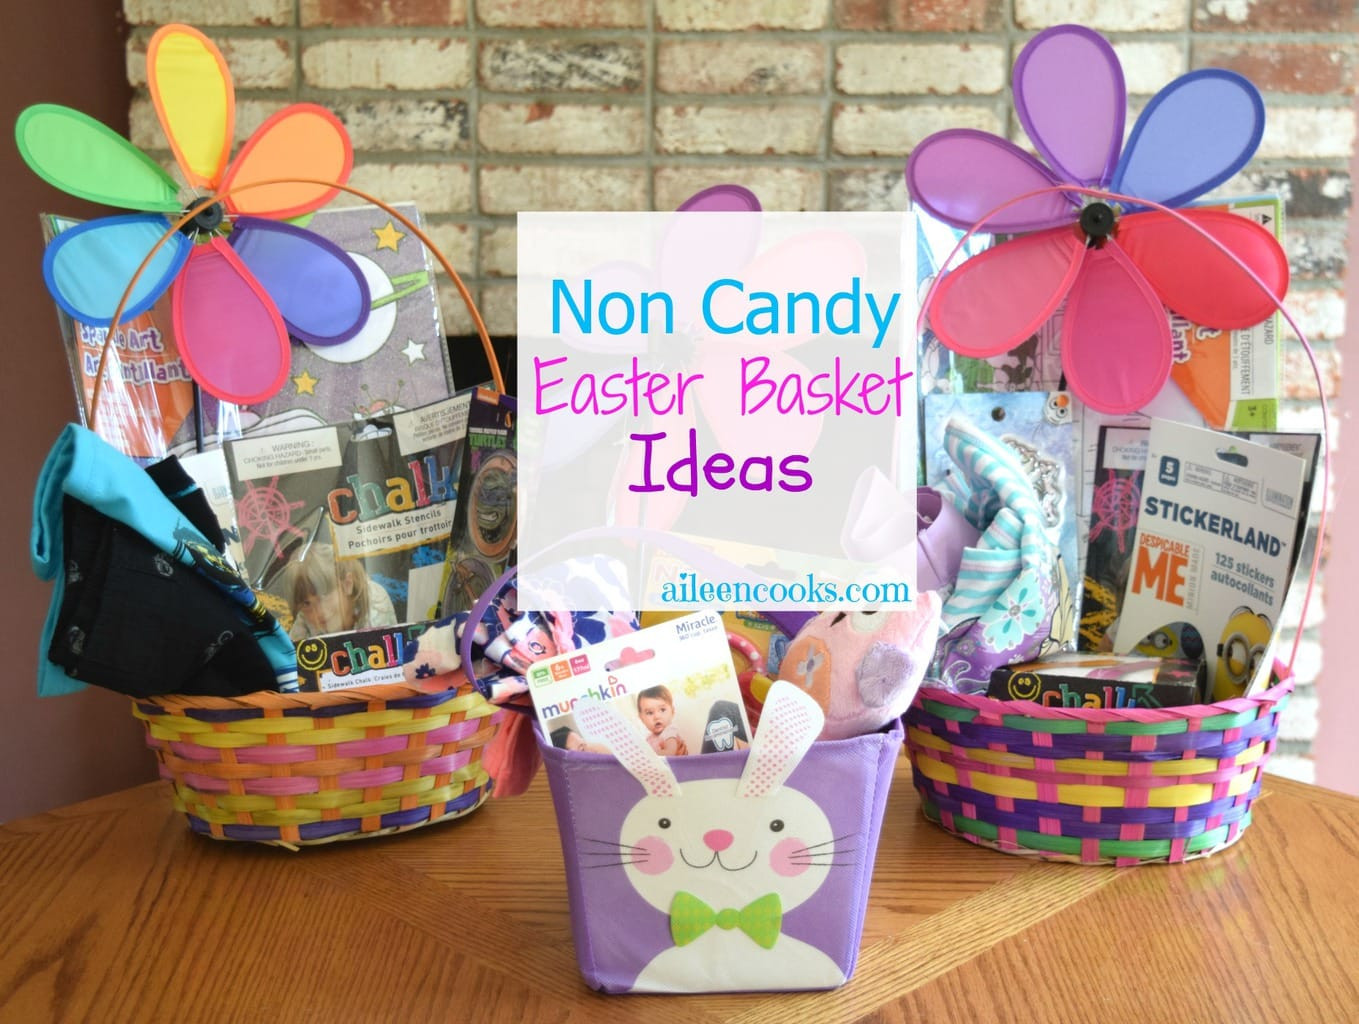 Non Candy Easter Ideas
 Non Candy Easter Basket Ideas Aileen Cooks